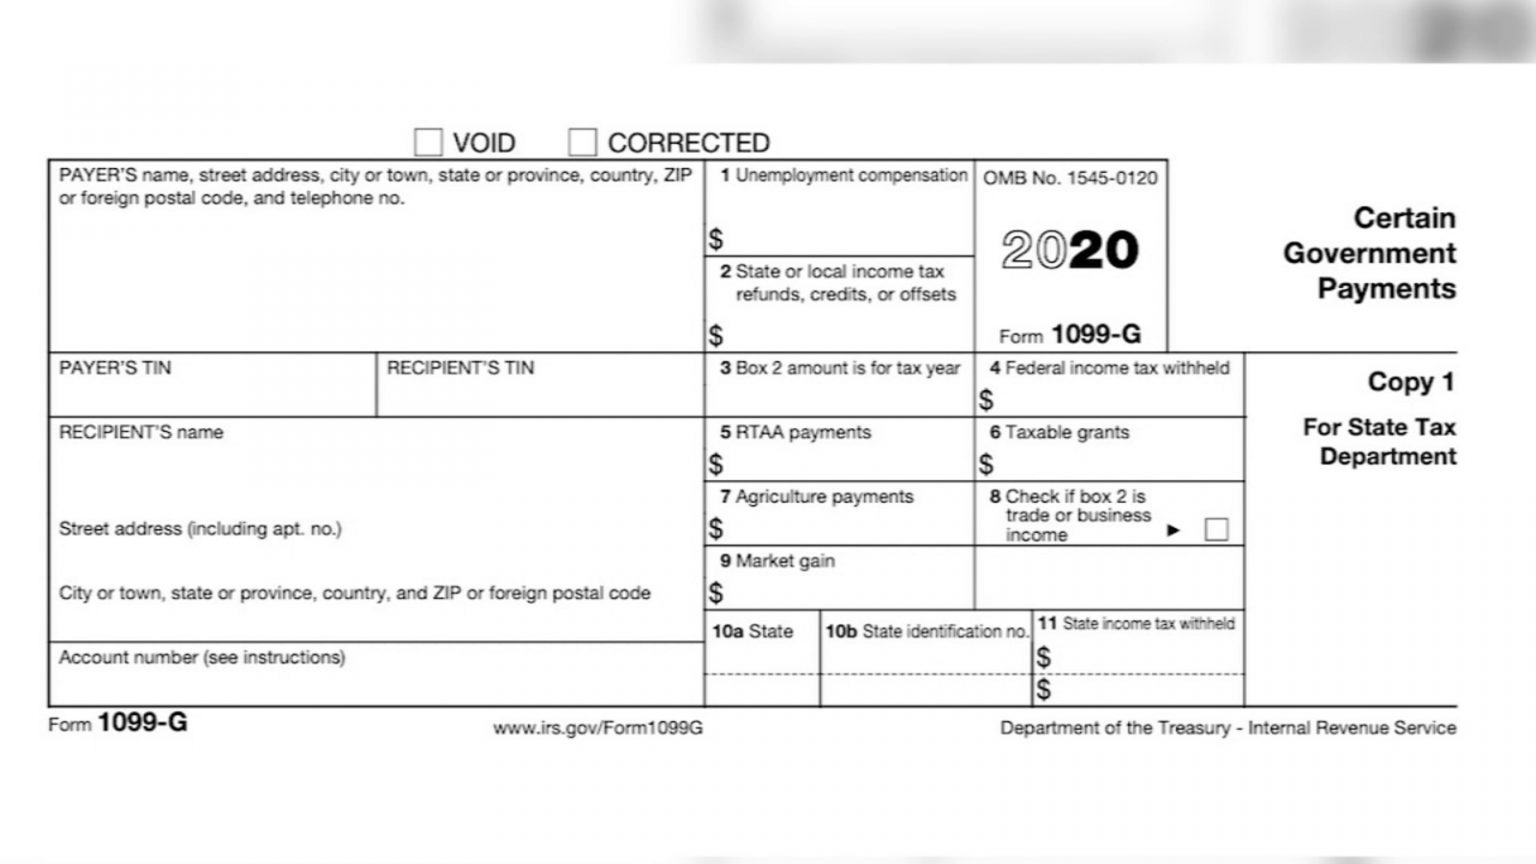 state of florida unemployment tax form